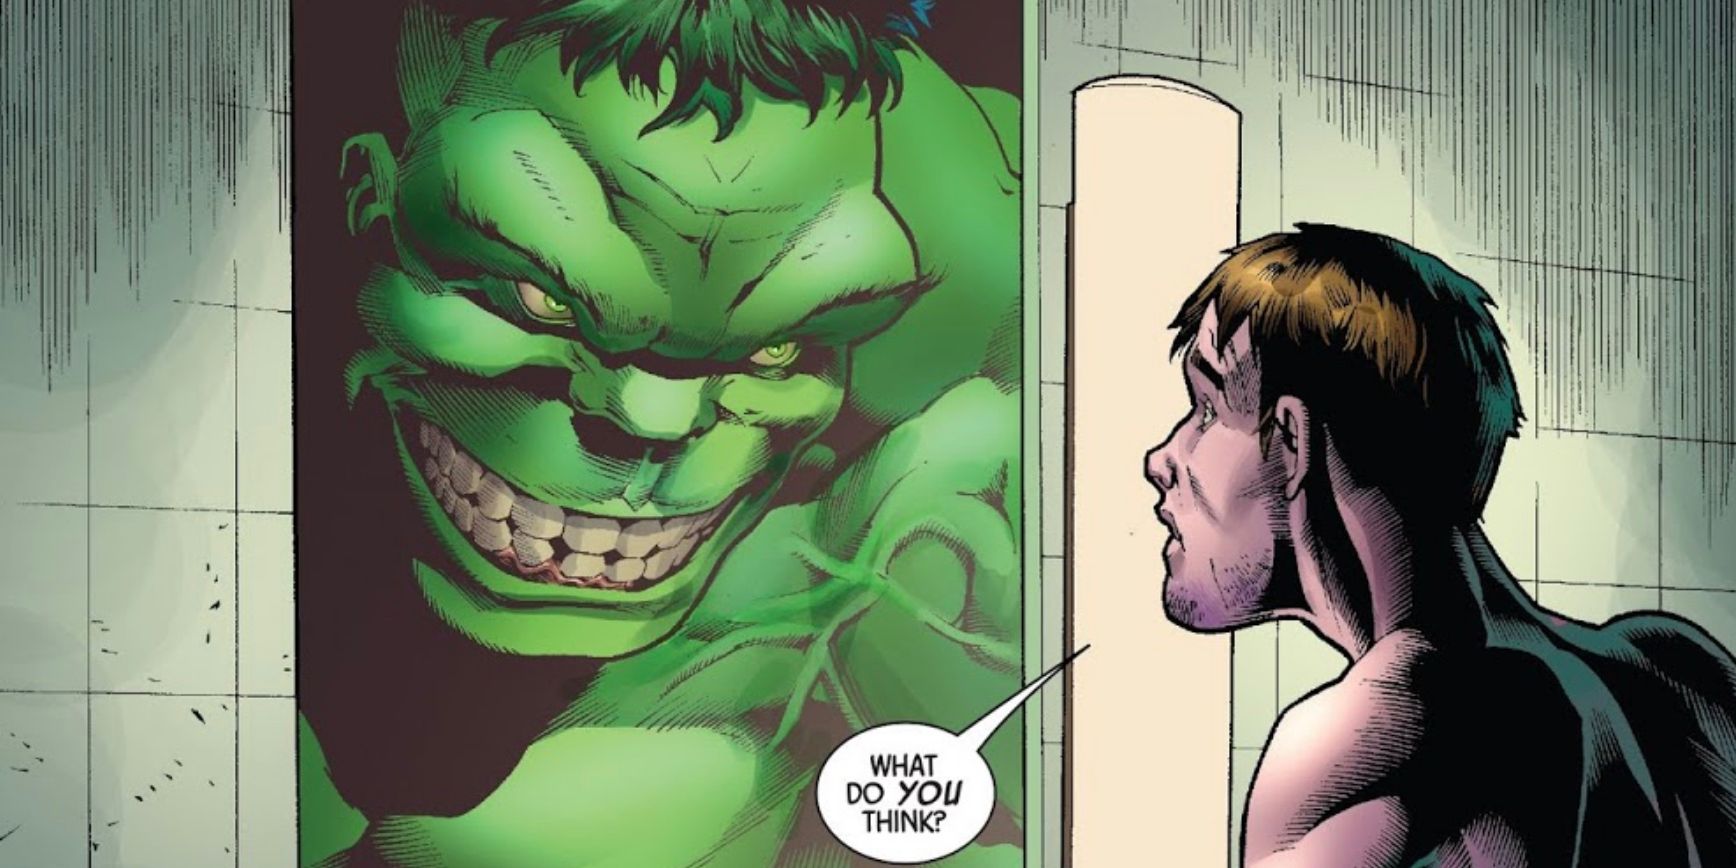 Bruce Banner looking in the mirror at a grinning reflection of the Hulk, asking "What do you think?"